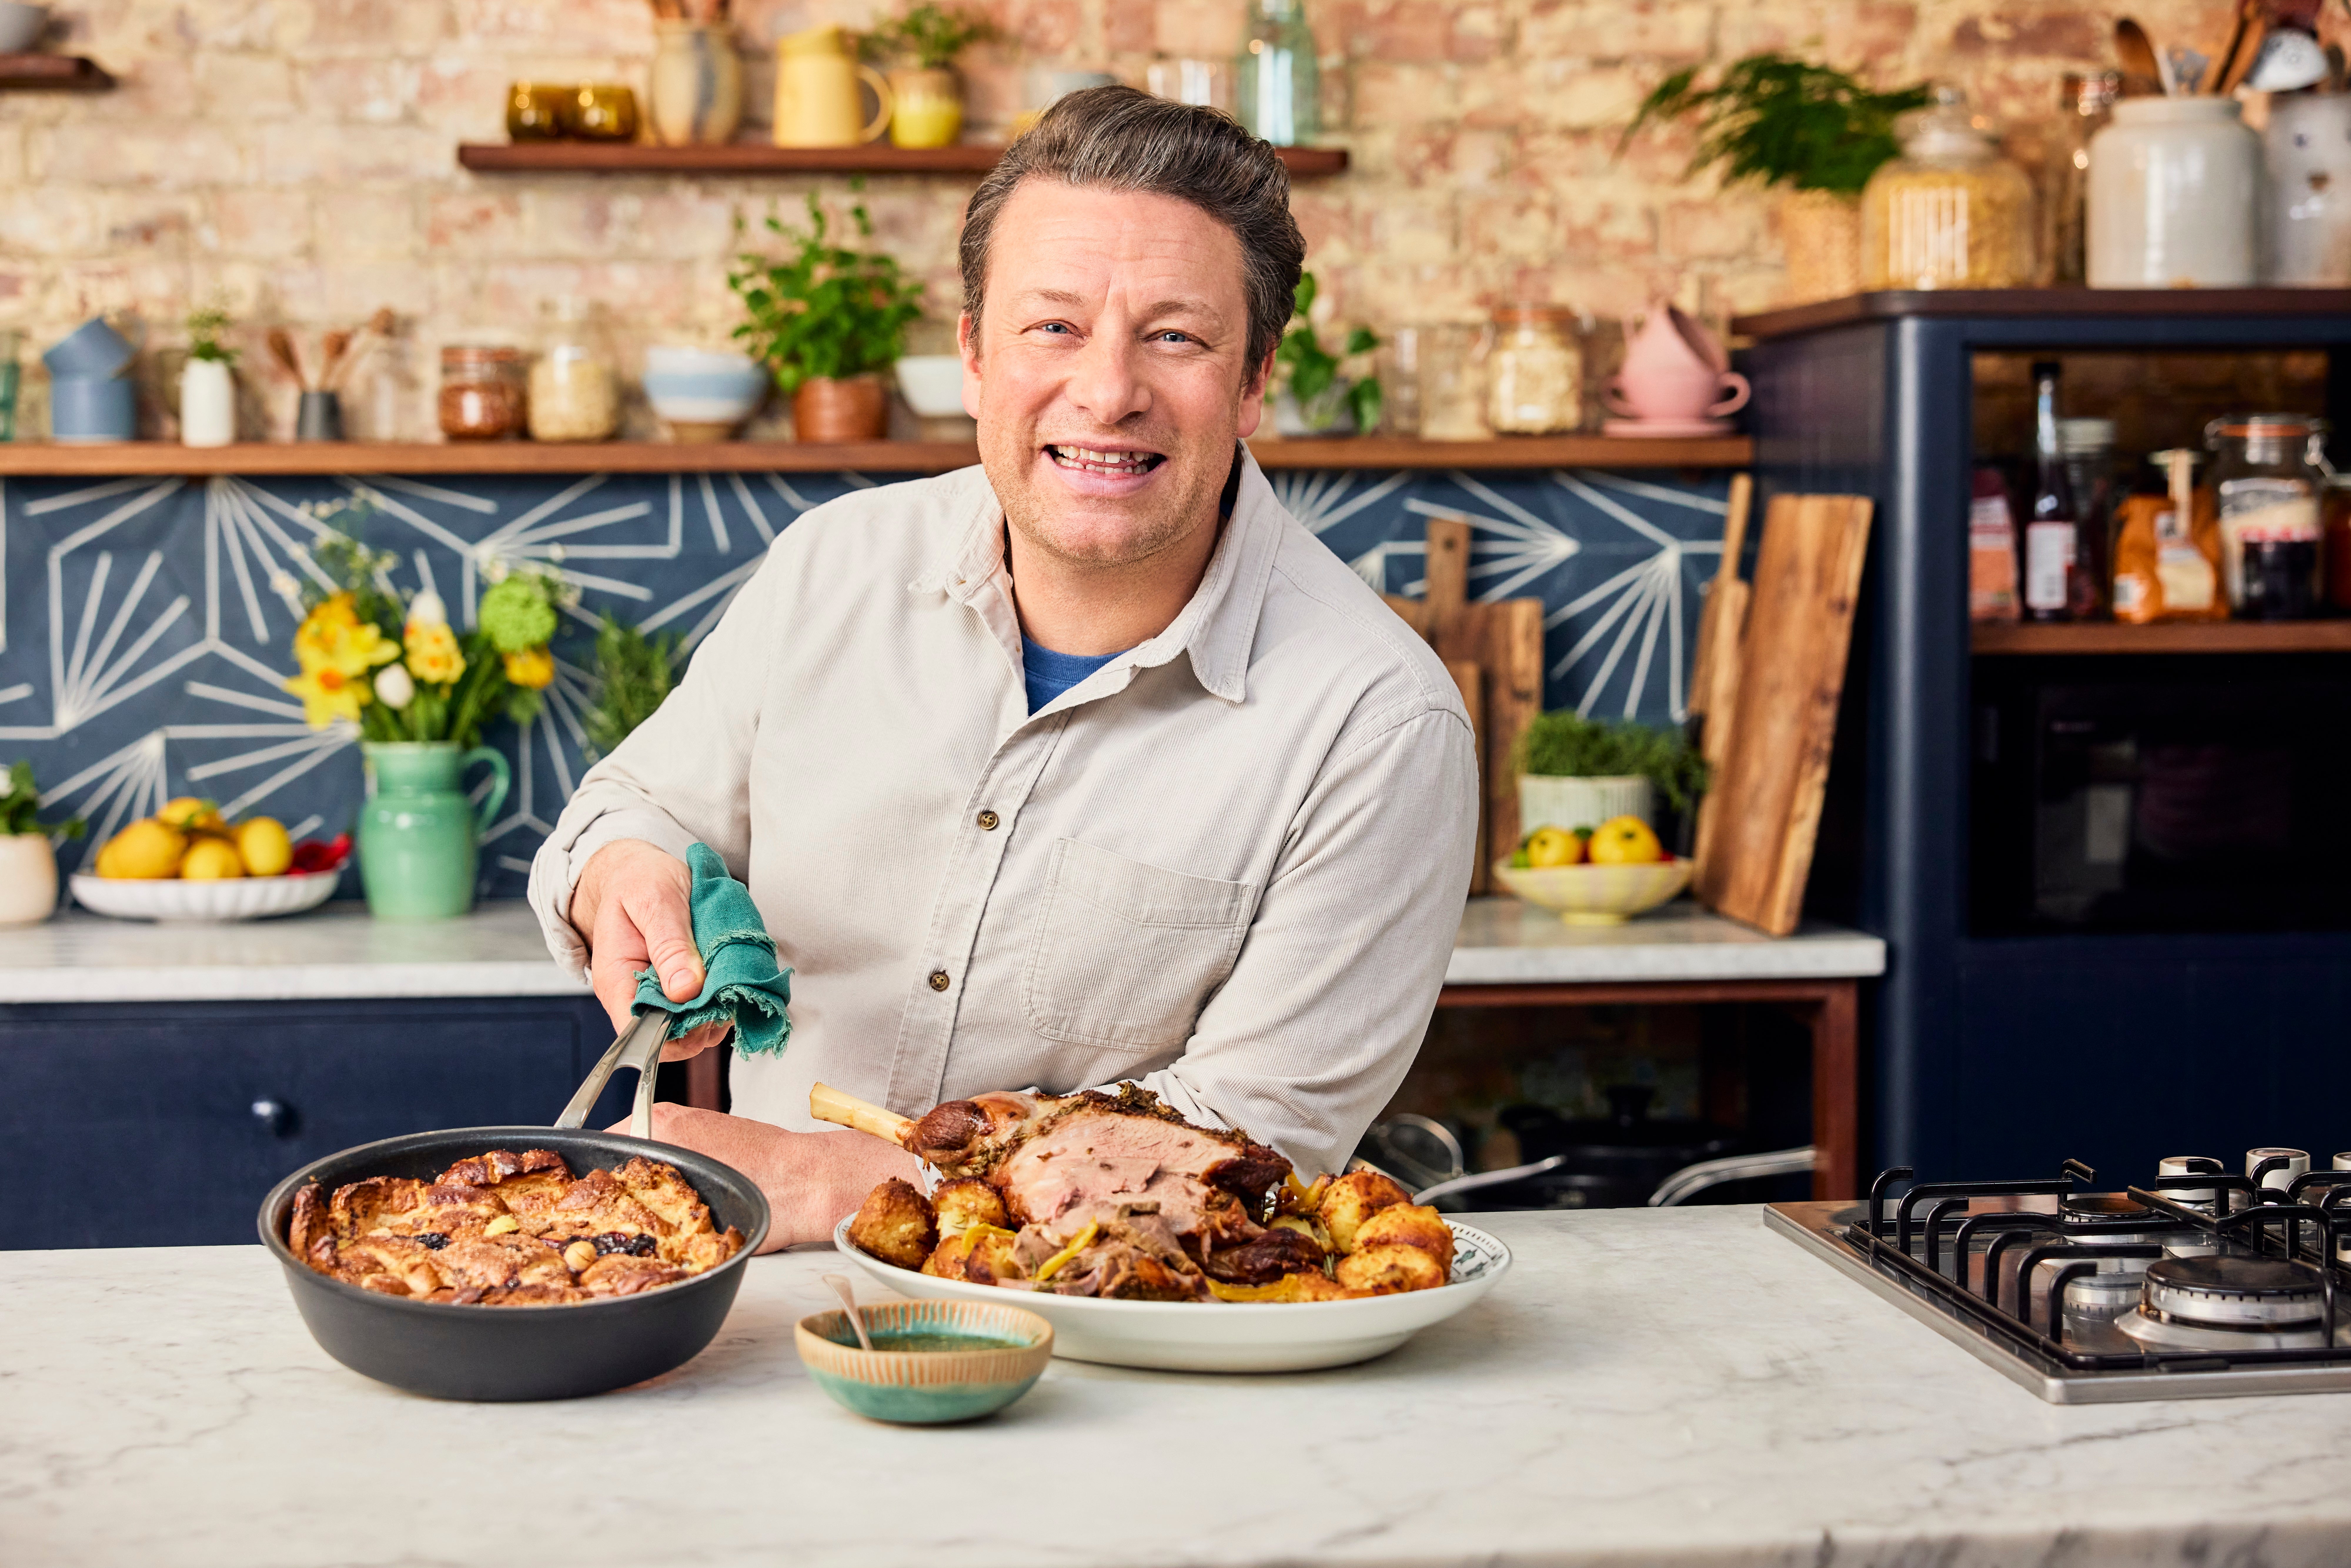 Jamie Oliver has partnered with Tesco to create some fuss-free Easter recipes you can serve up at any occasion